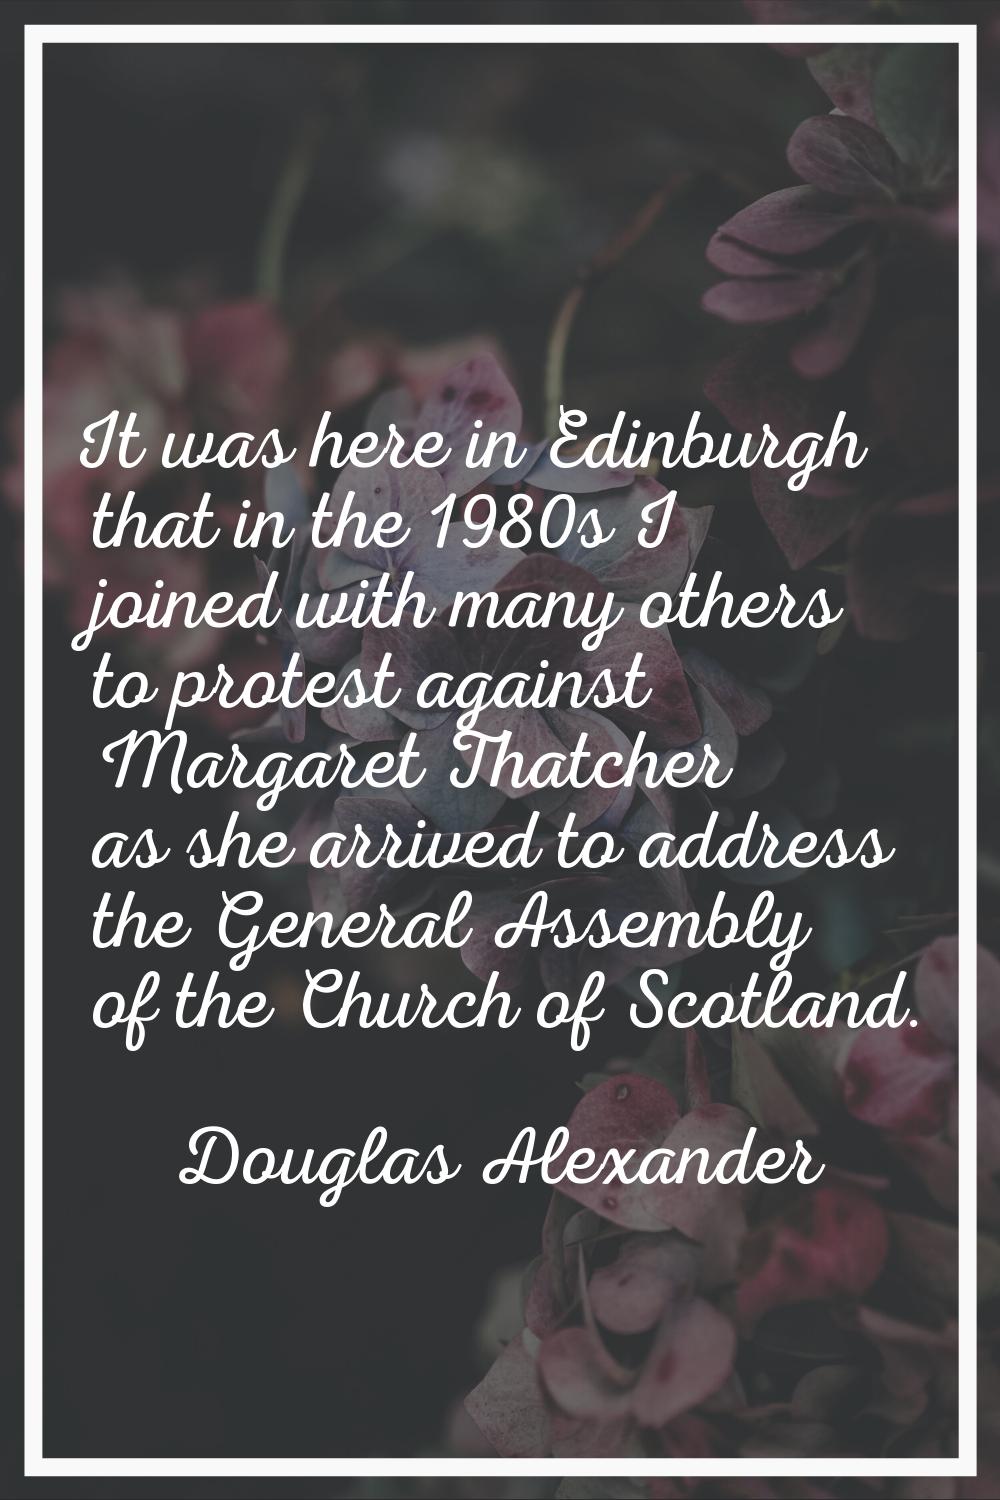 It was here in Edinburgh that in the 1980s I joined with many others to protest against Margaret Th